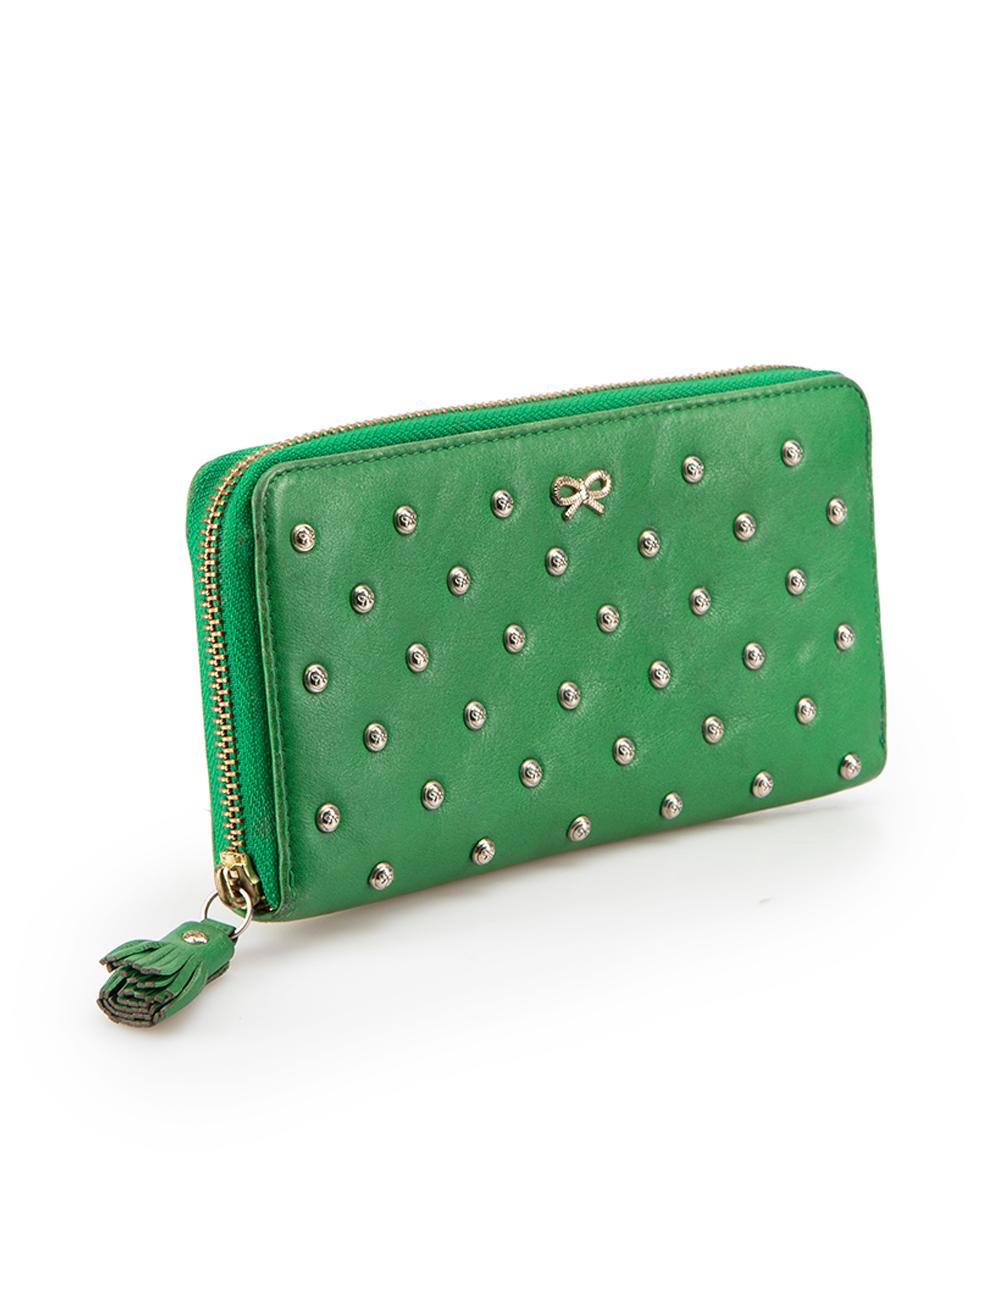 CONDITION is Very good. Minimal wear to purse is evident. Minimal wear to the back and the base corners with marks to the leather on this used Anya Hindmarch designer resale item.



Details


Green

Leather

Wallet

Silver studded pattern

Zip